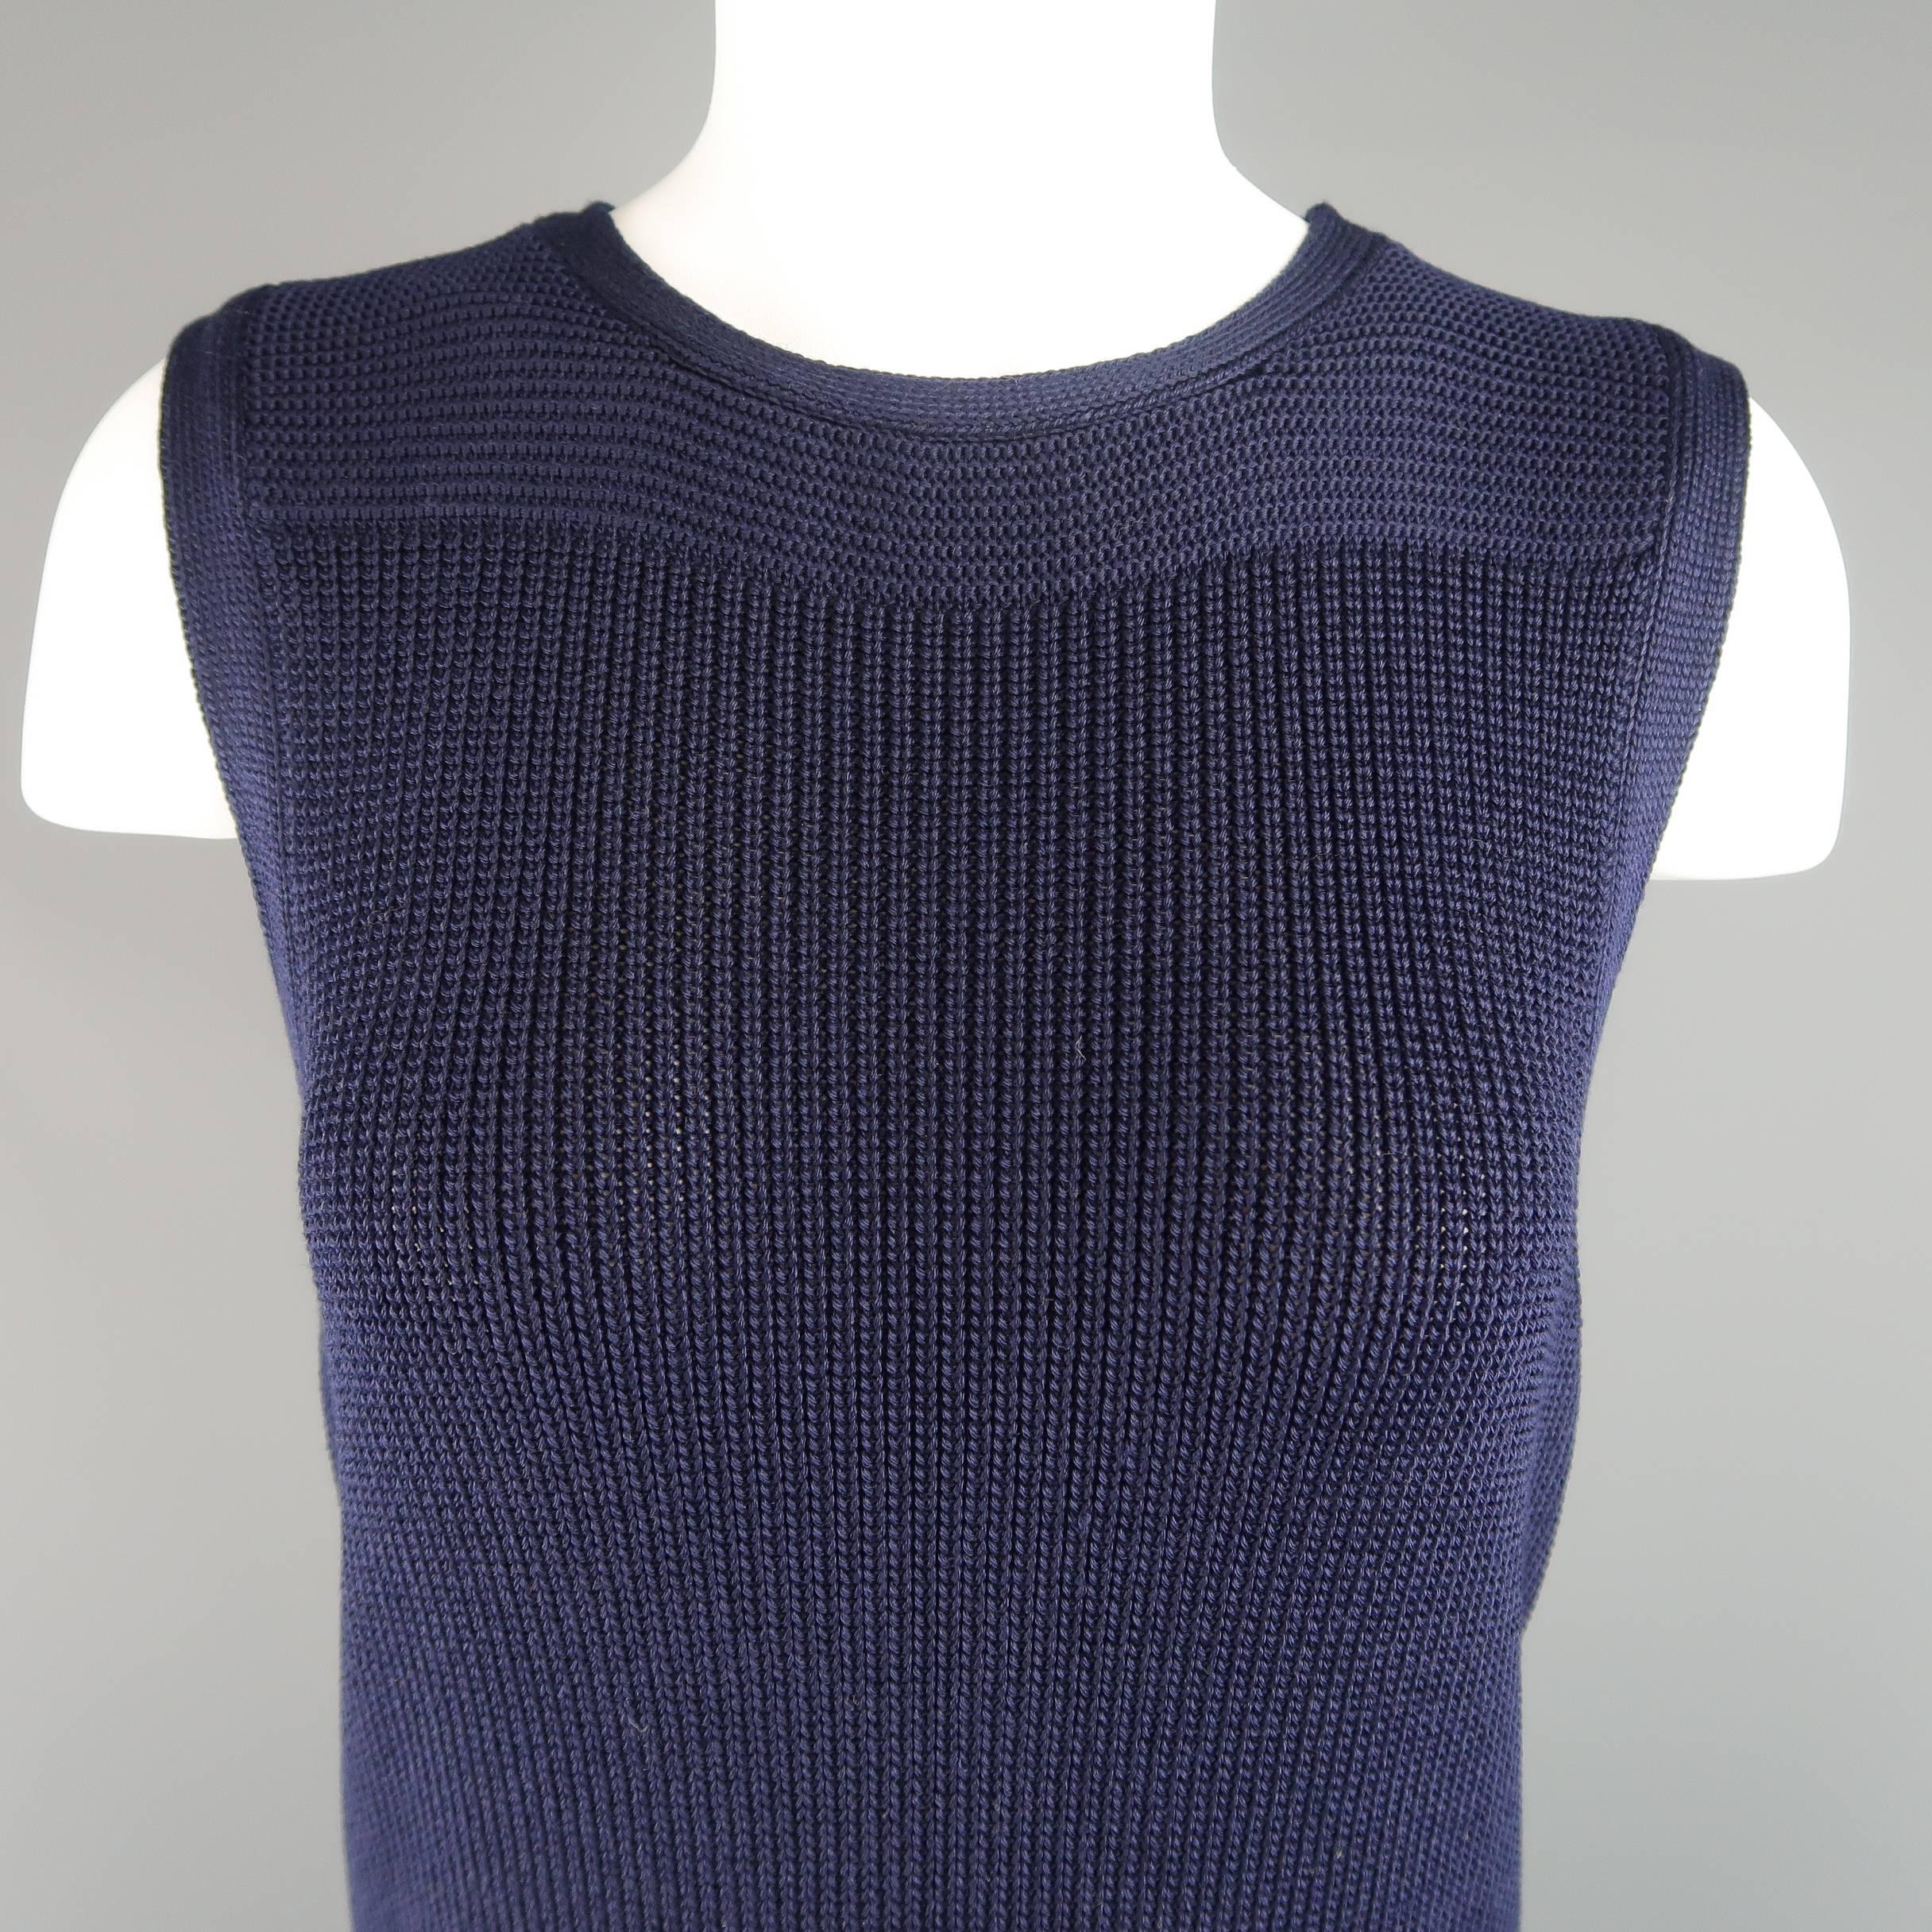 RALPH LAUREN Collection sweater vest top comes in navy blue silk blend textured knit and features a round neckline, extended length, and side slits. Wear throughout knit. Made in Italy.
 
Fair Pre-Owned Condition.
Marked: M
 
Measurements:
